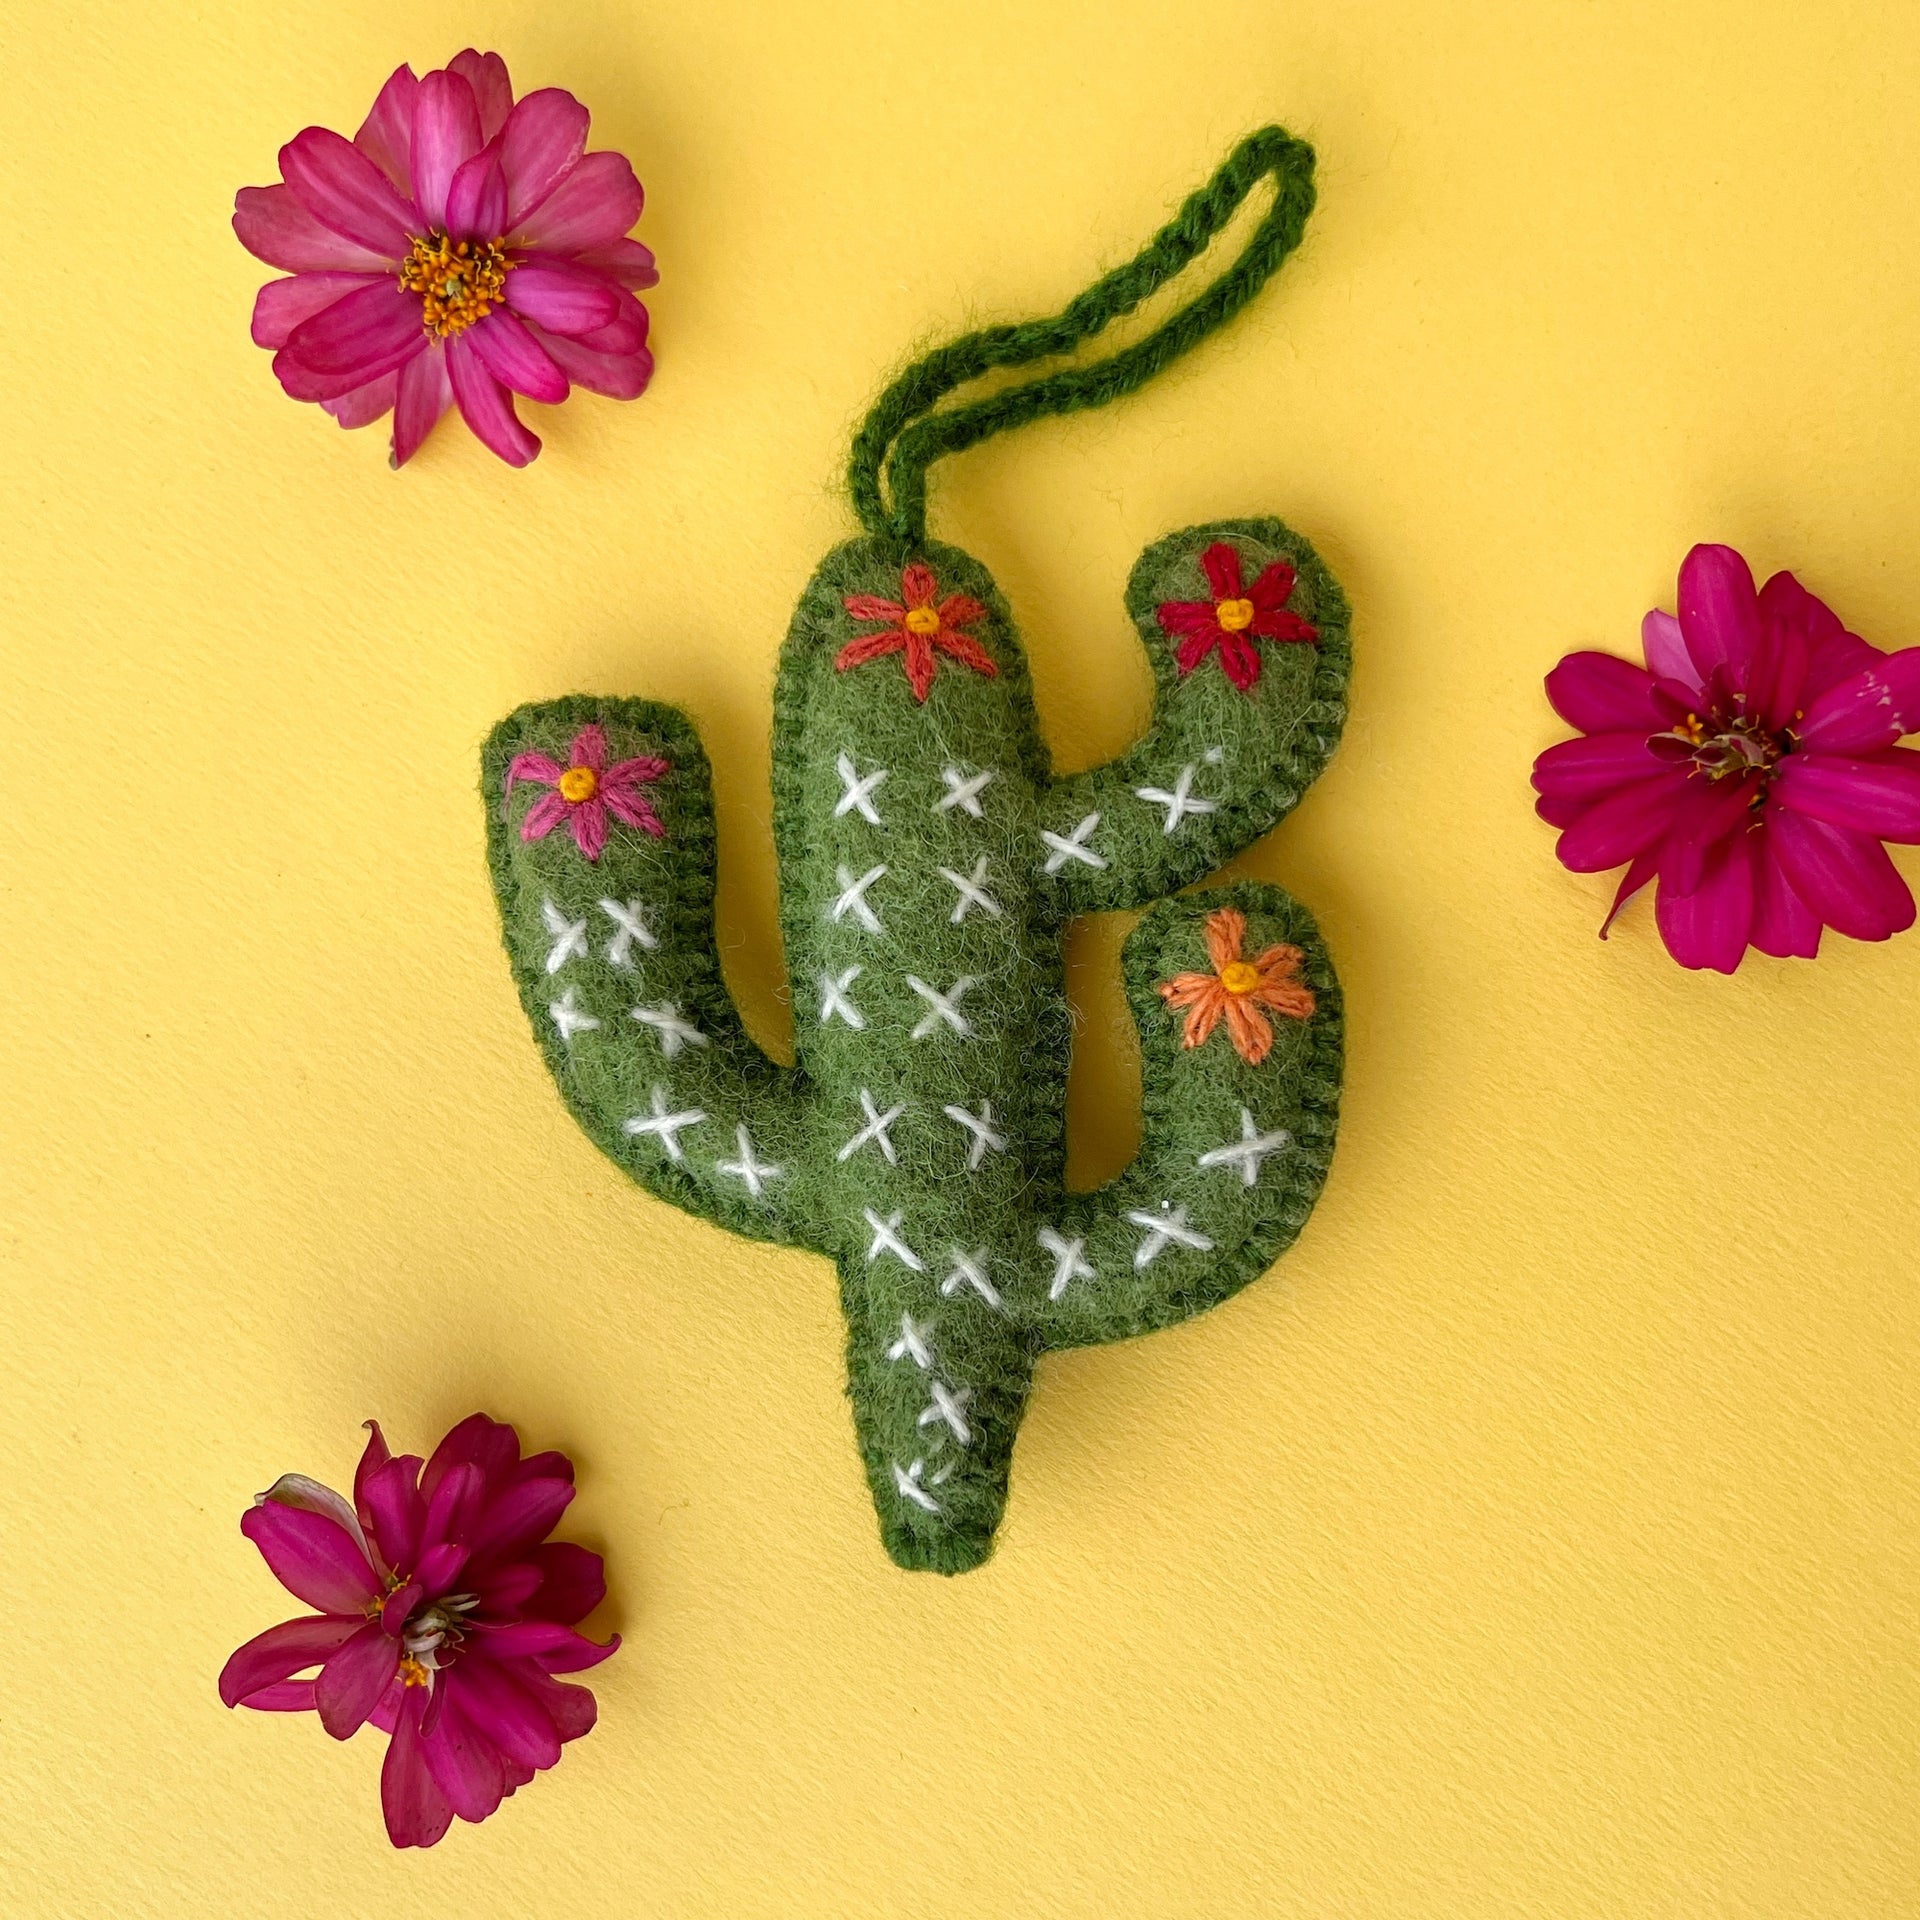 embroidered Cactus Christmas ornament styled on yellow with pink flowers